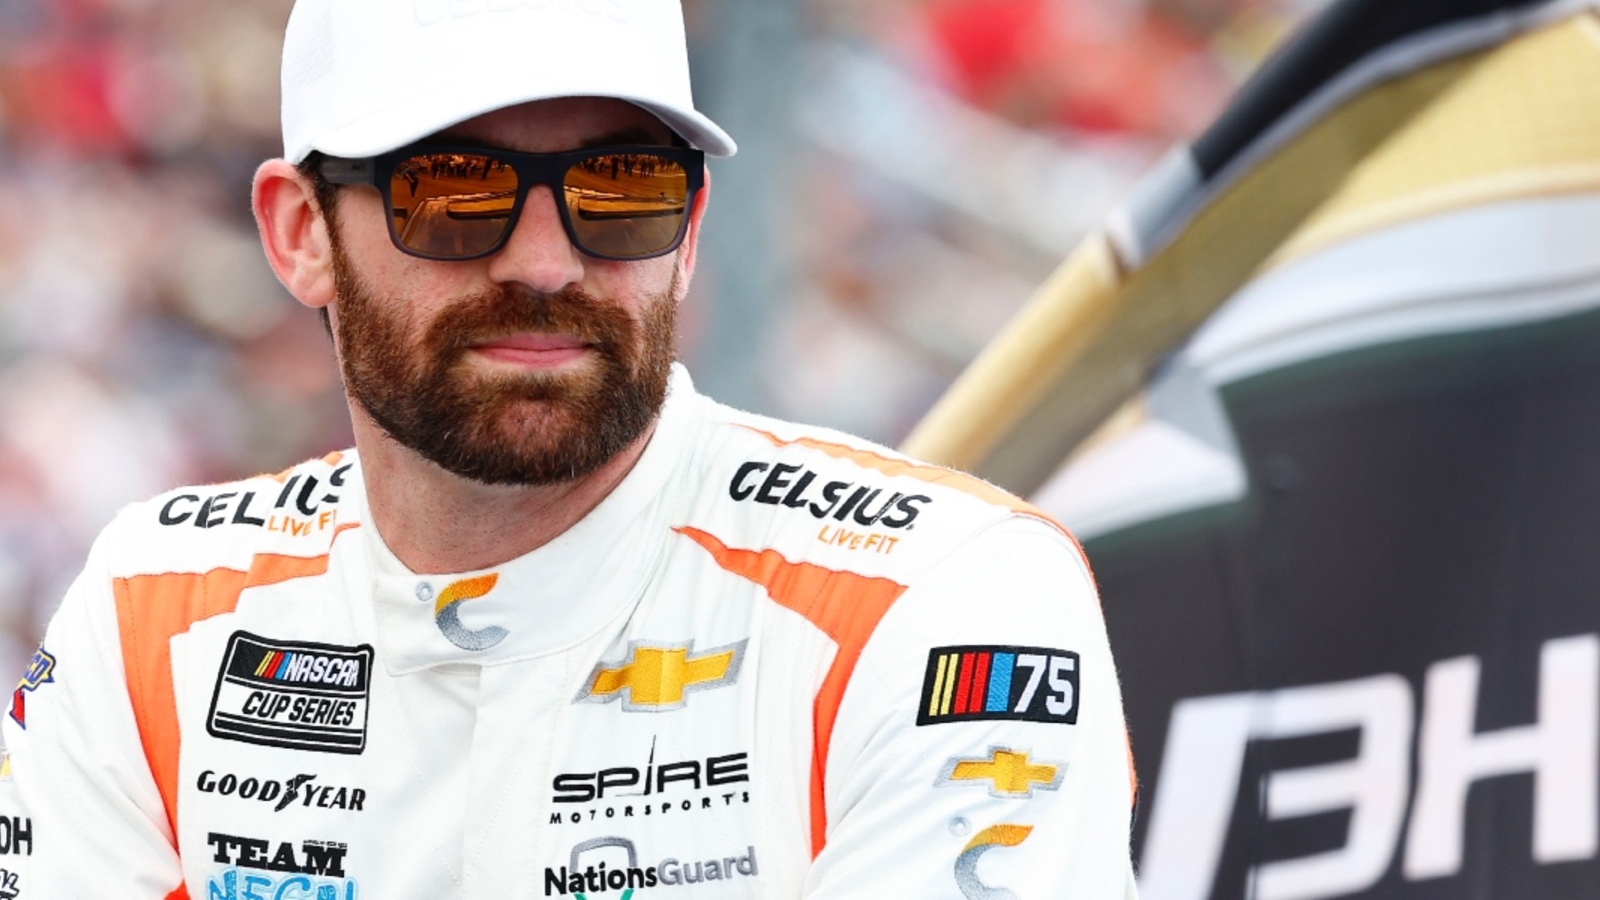 Corey LaJoie has stacked his pennies, now he is cashing in with Spire Motorsports